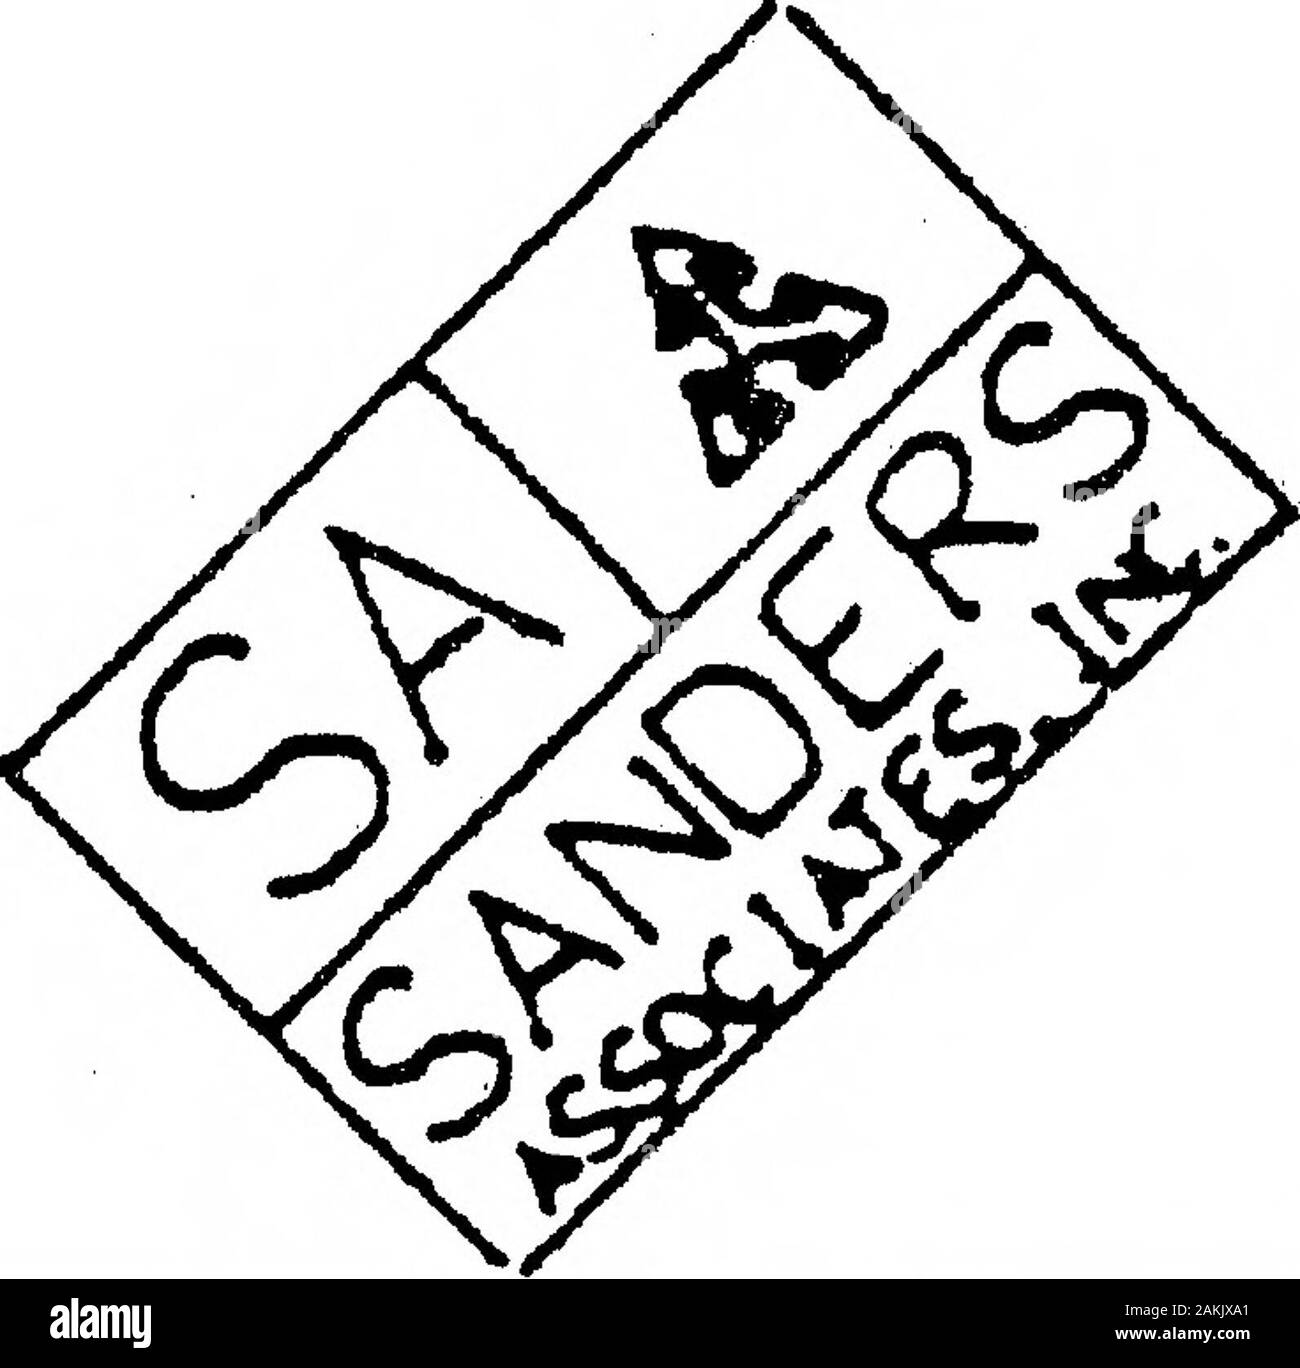 sandersAssociates :: graphic7 :: GA-77-274 Rev F Graphic 7 Acceptance Test Procedure May1981 . ator intervention after it is loaded. Verify that the test pattern displayed on the display indicator isthe same as that shown in figure 4-7 and as described belows a. This is a dynamic test pattern and as such requires approxi-mately six seconds for a complete cycle. NOTE - The pattern cycle time is not an acceptancerequirement and does not require measurement. b. The two logo boxes located above the ROTATION nomenclaturerotate 360° about a center axis in a counterclockwise rotation. c. The two logo Stock Photo